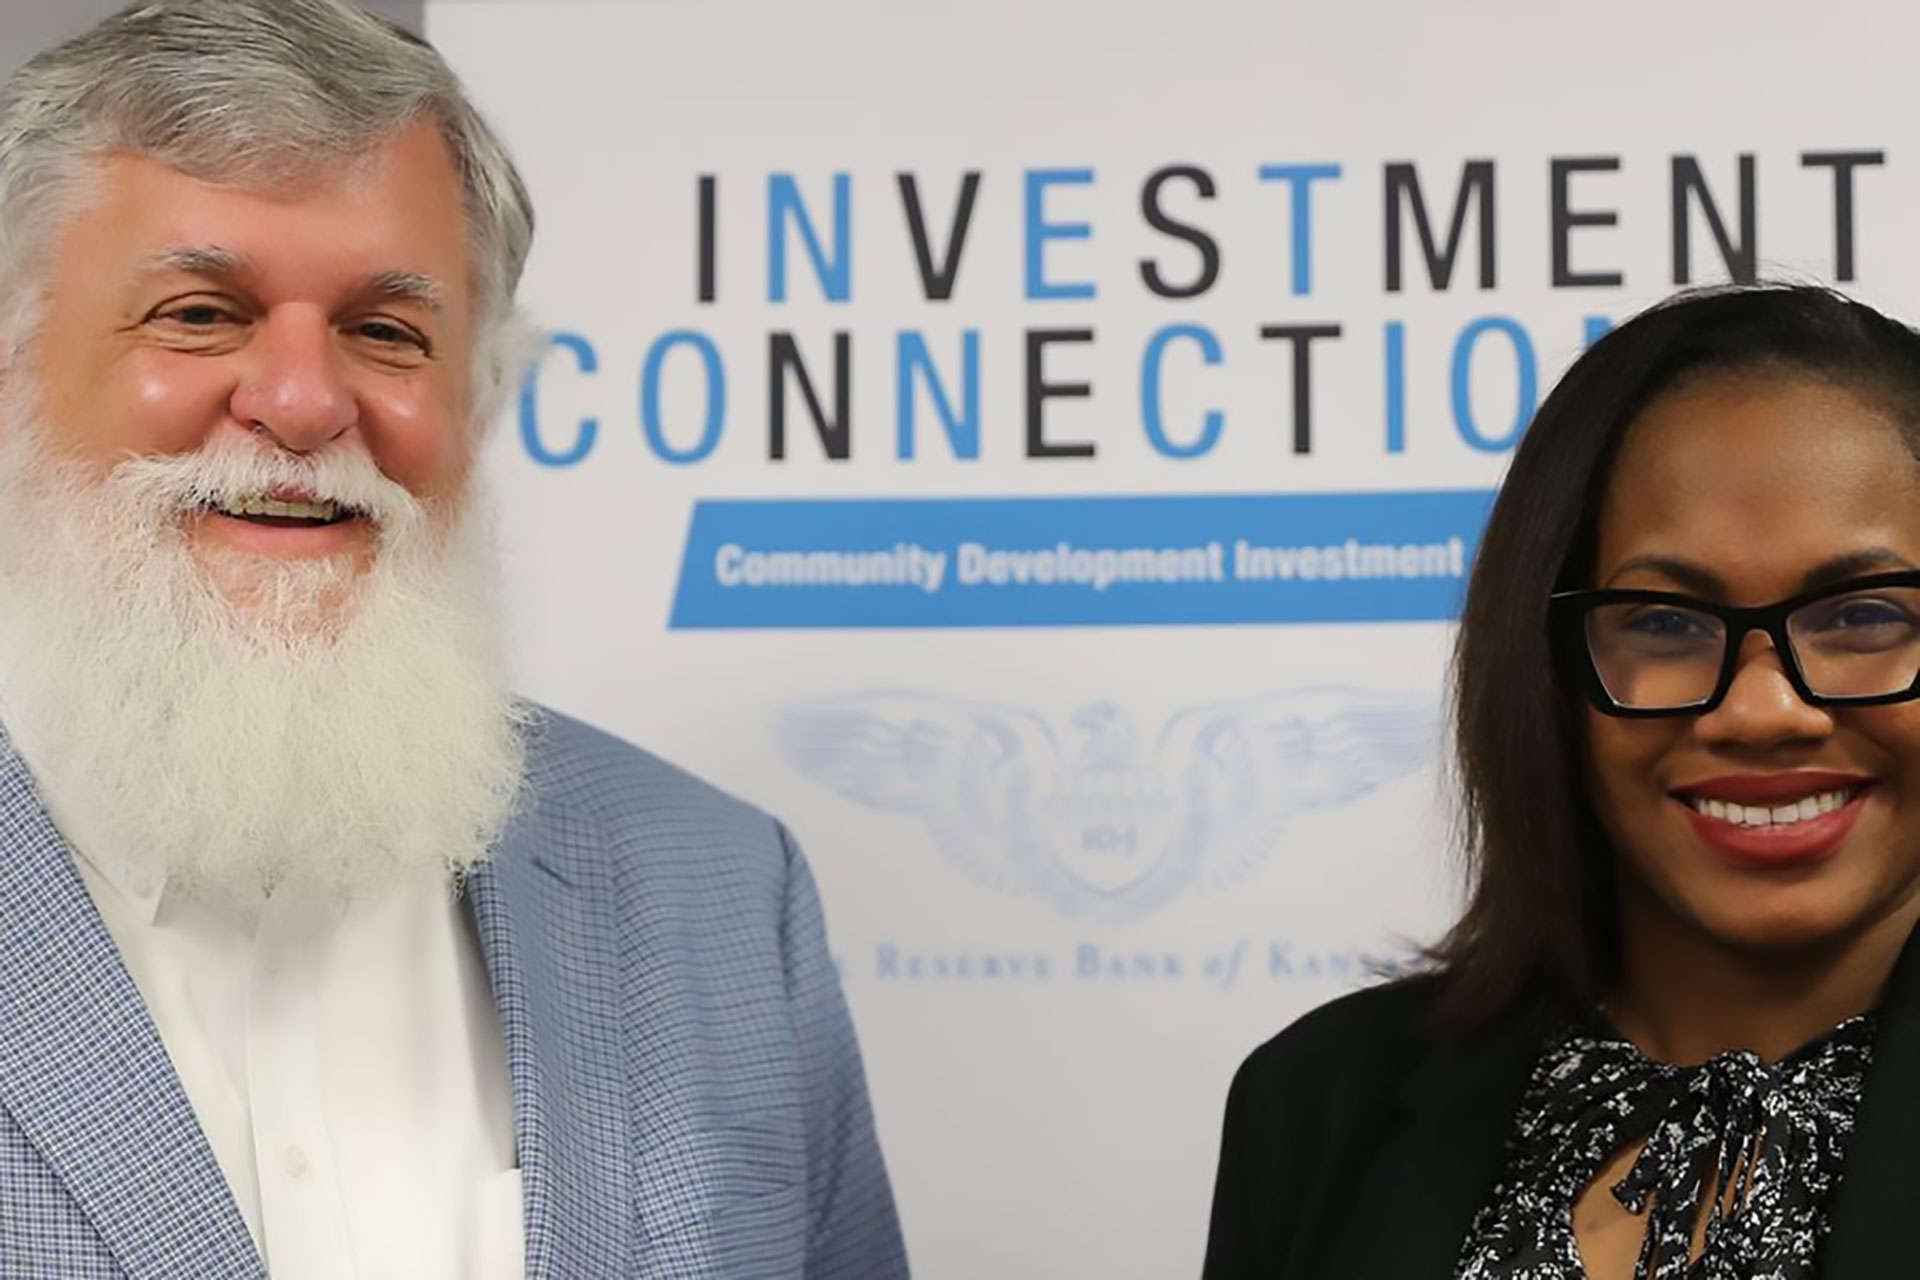 Steve Shepelwich and Teesha Miller at an Investment Connection event hosted by the Kansas City Fed.